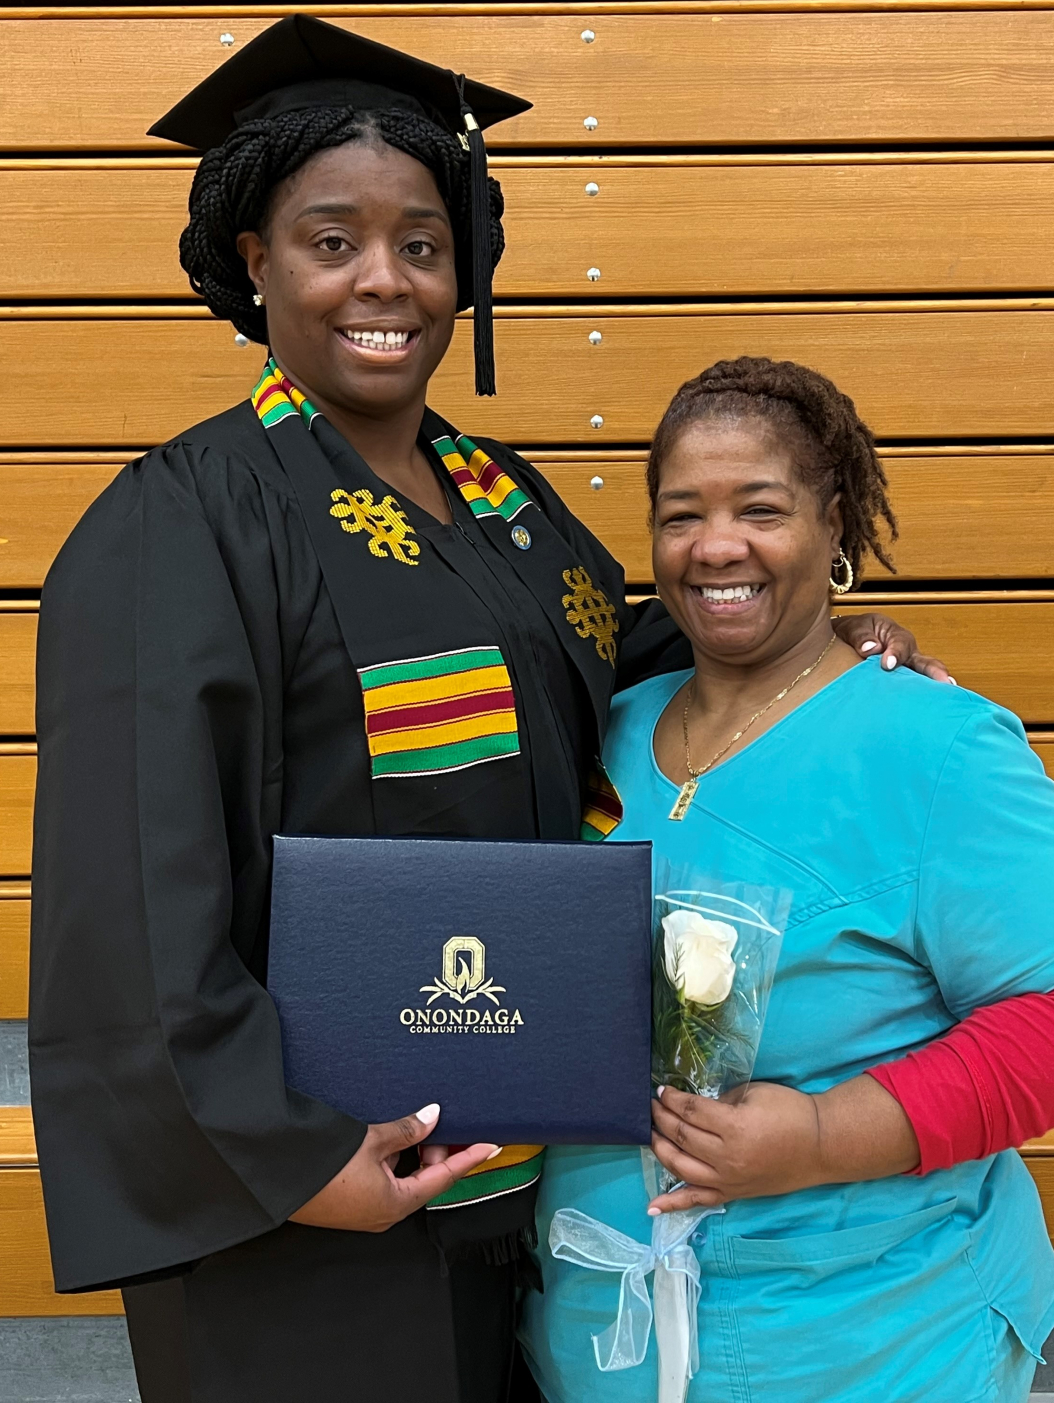 OCC mother and daughter Nursing degree program alumnae Niokey Williams '21 (left) and Candace Cathcart '15 (right).